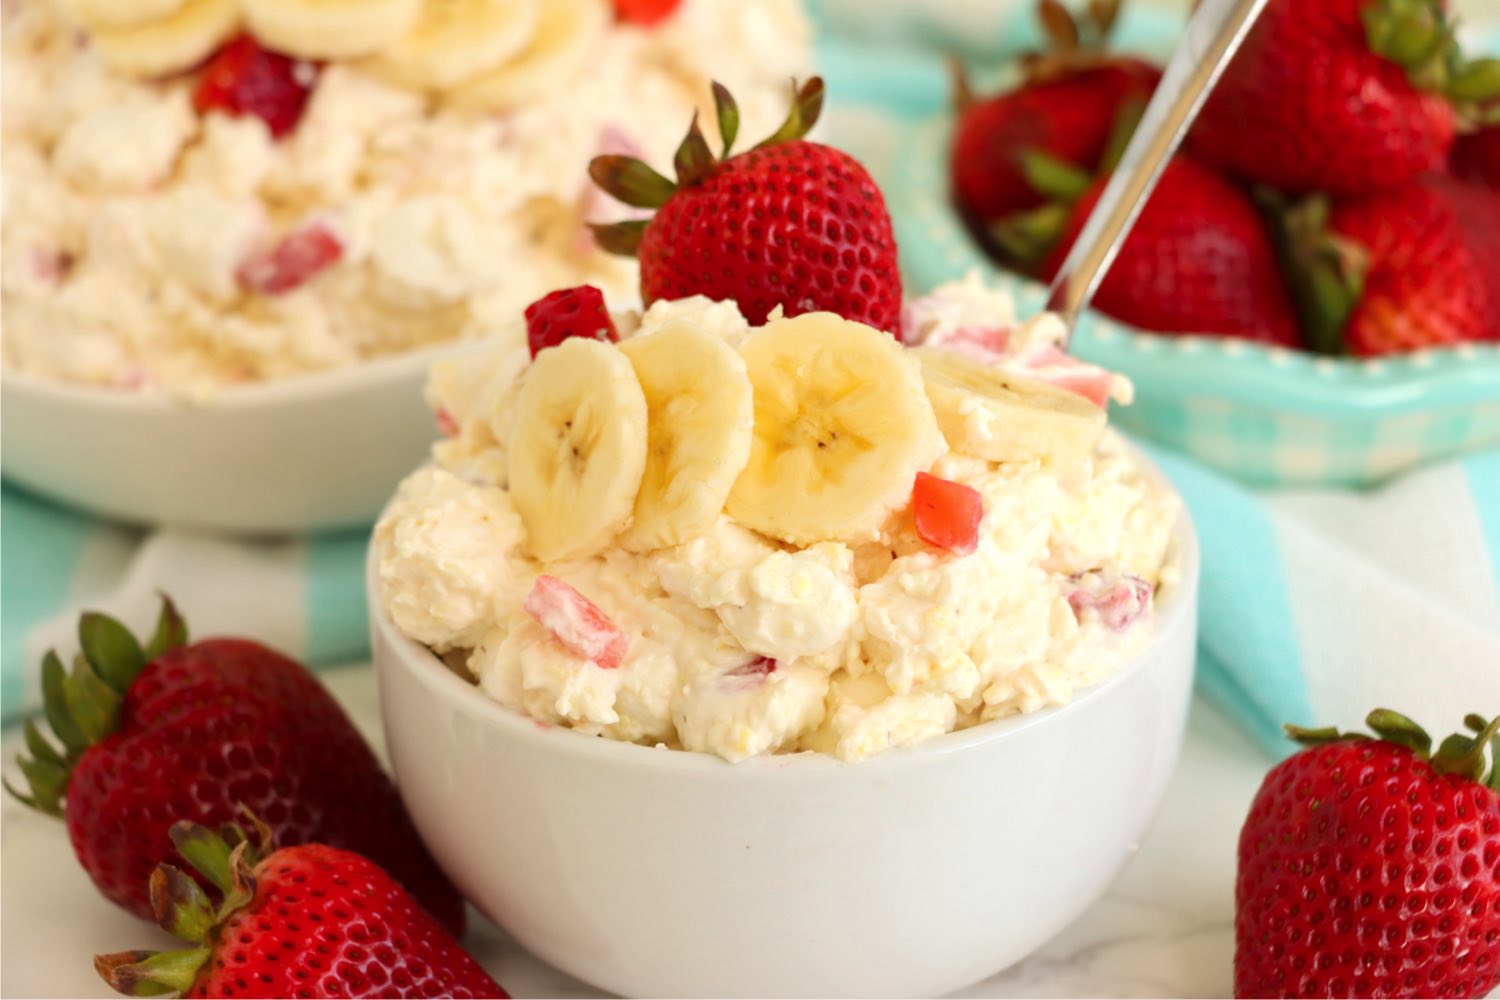 white bowl with a spoon holding a strawberry and banana dessert salad.